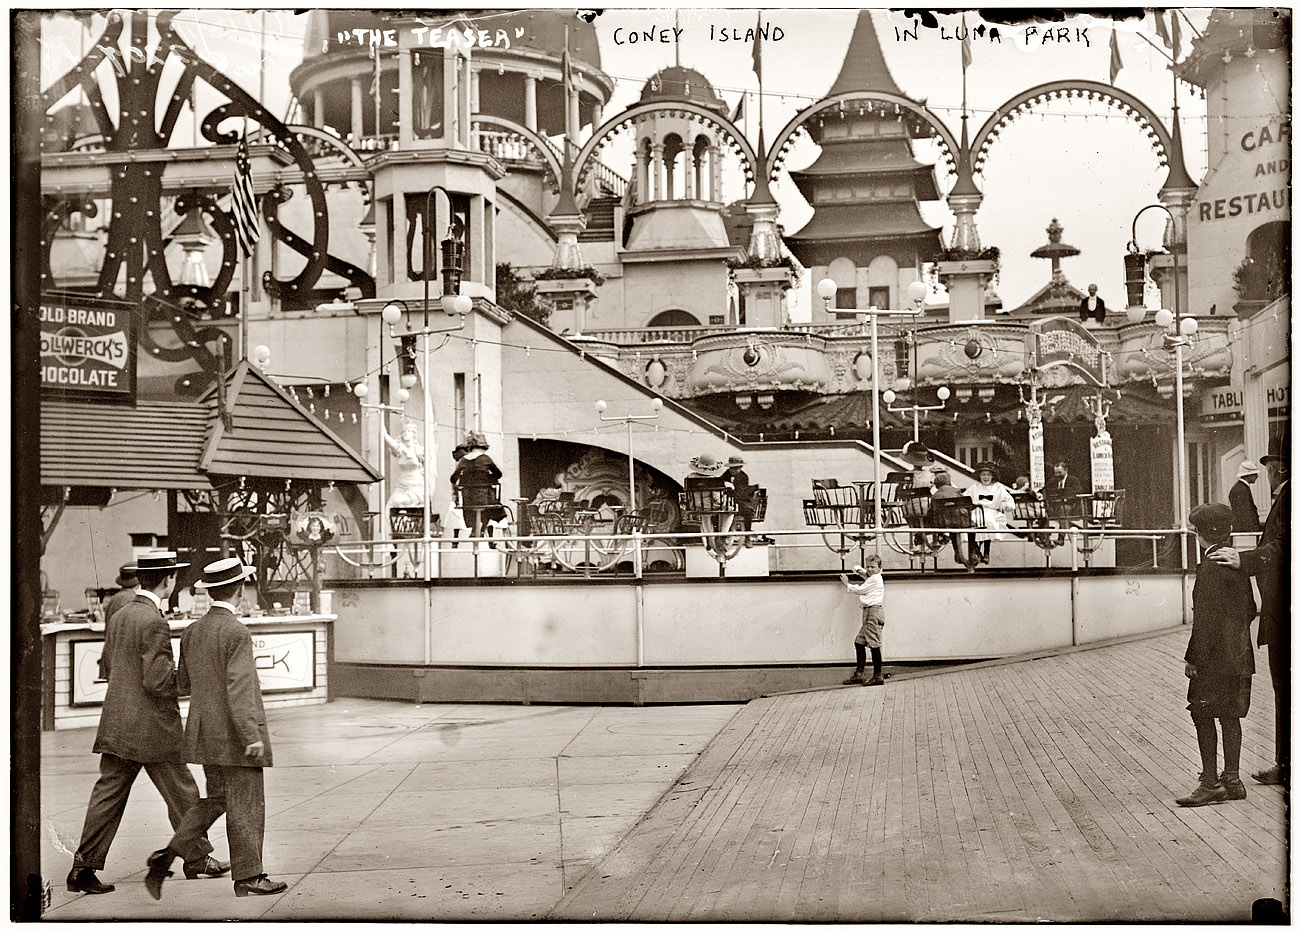 June 13, 1911. "The Teaser," a ride at Coney Island's Luna Park. View full size. 5x7 glass negative, George Grantham Bain Collection.